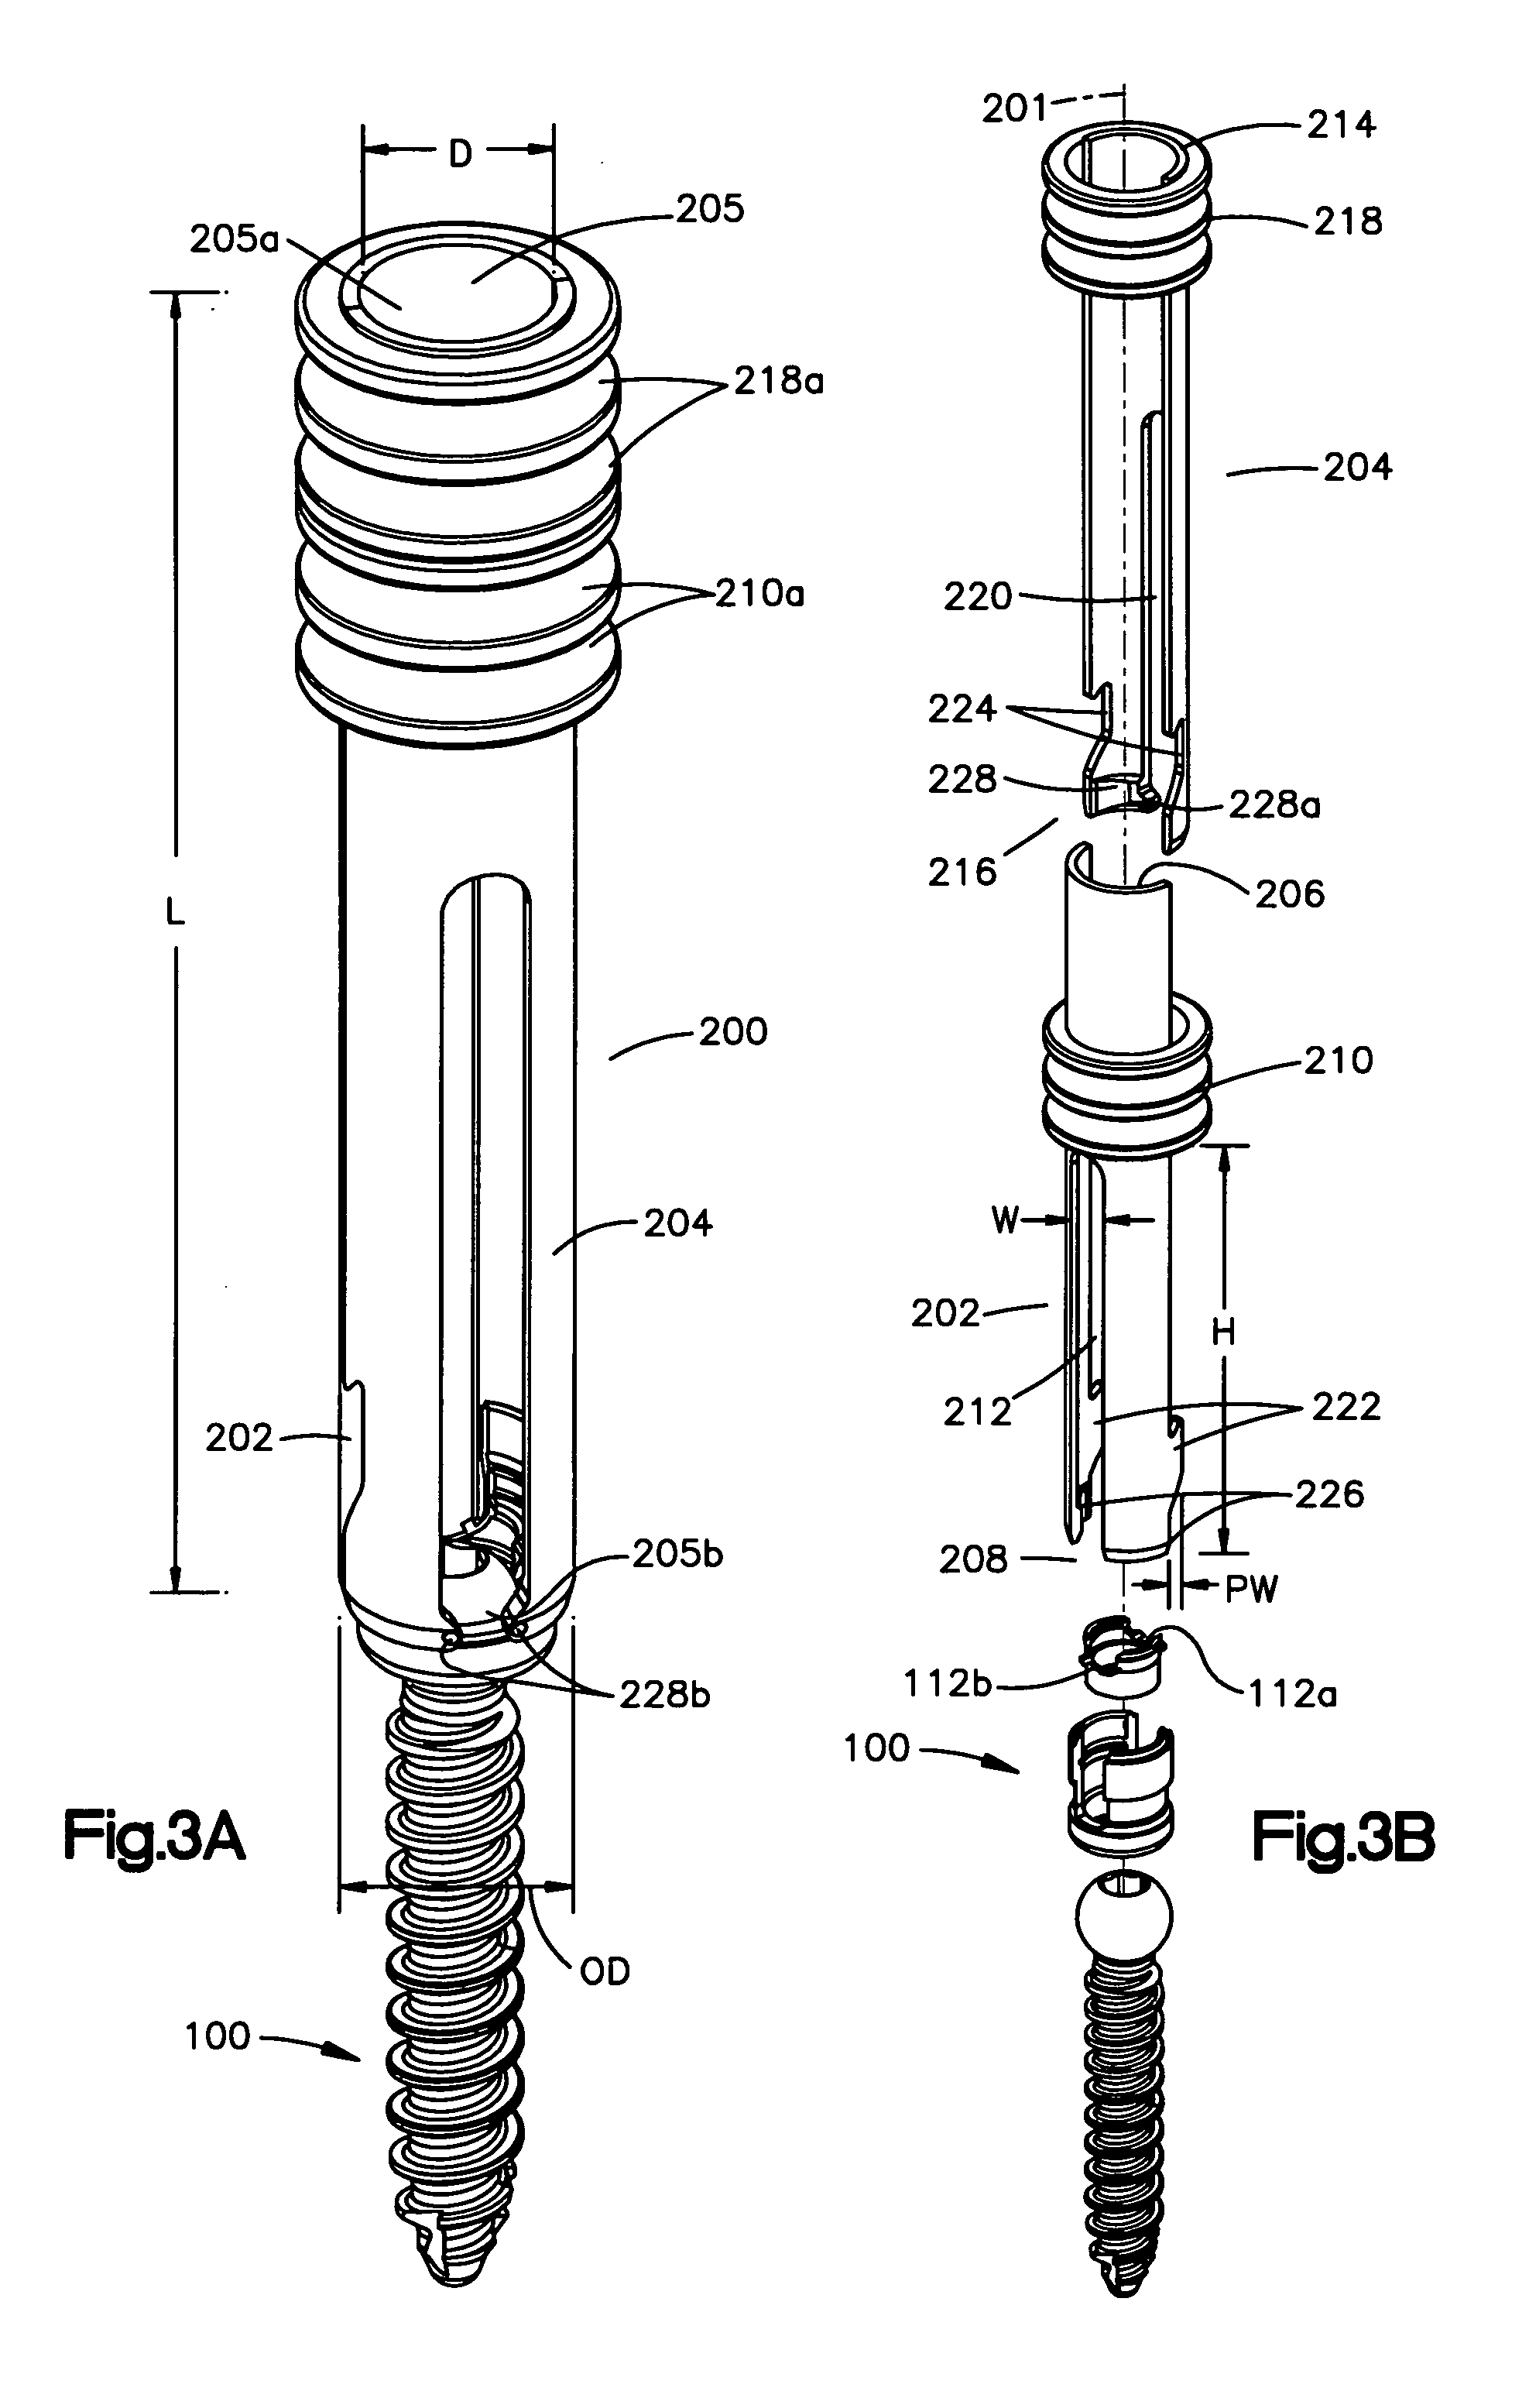 Methods of spinal fixation and instrumentation